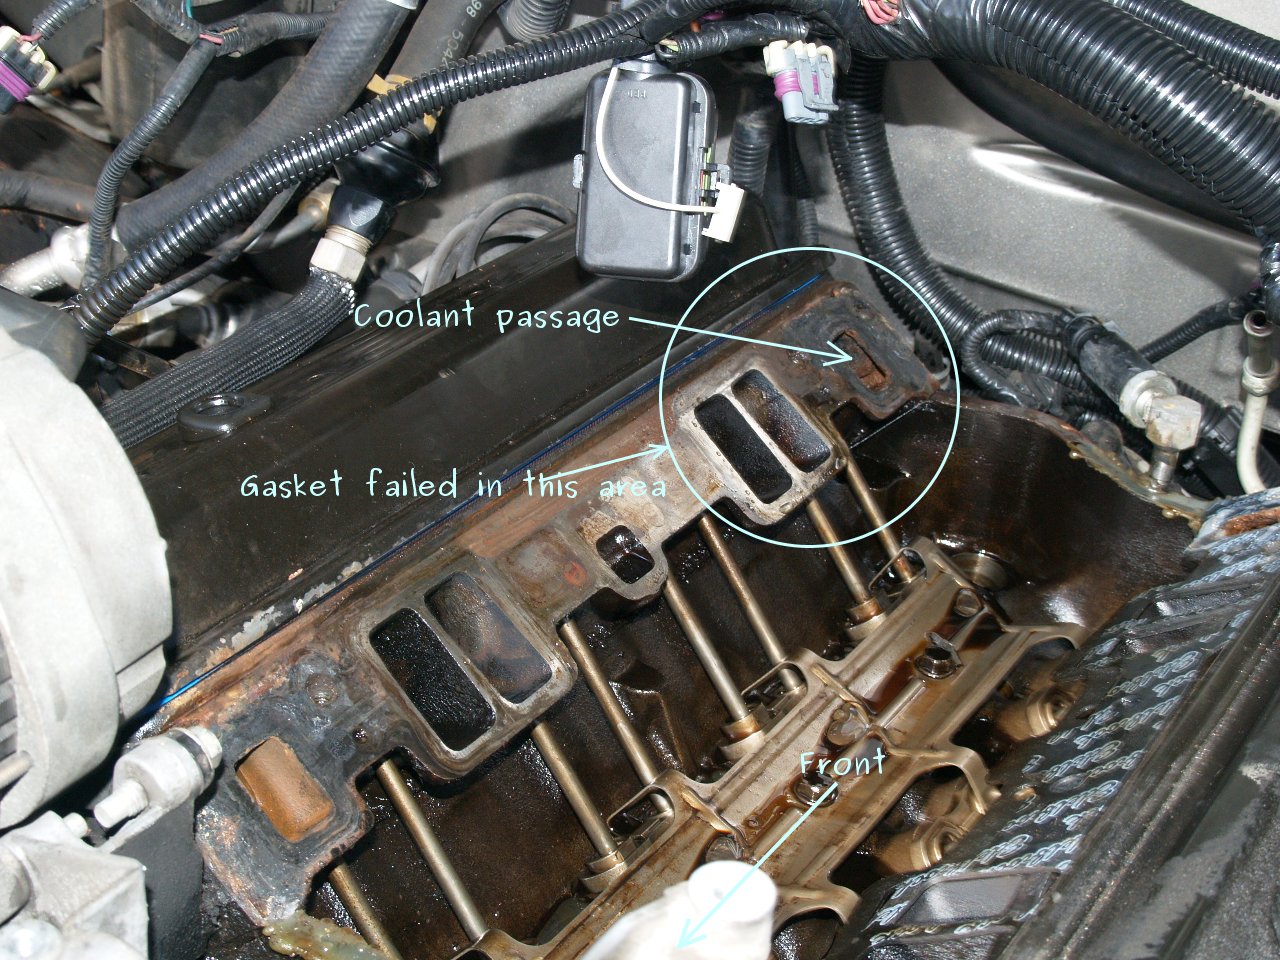 See P208E in engine